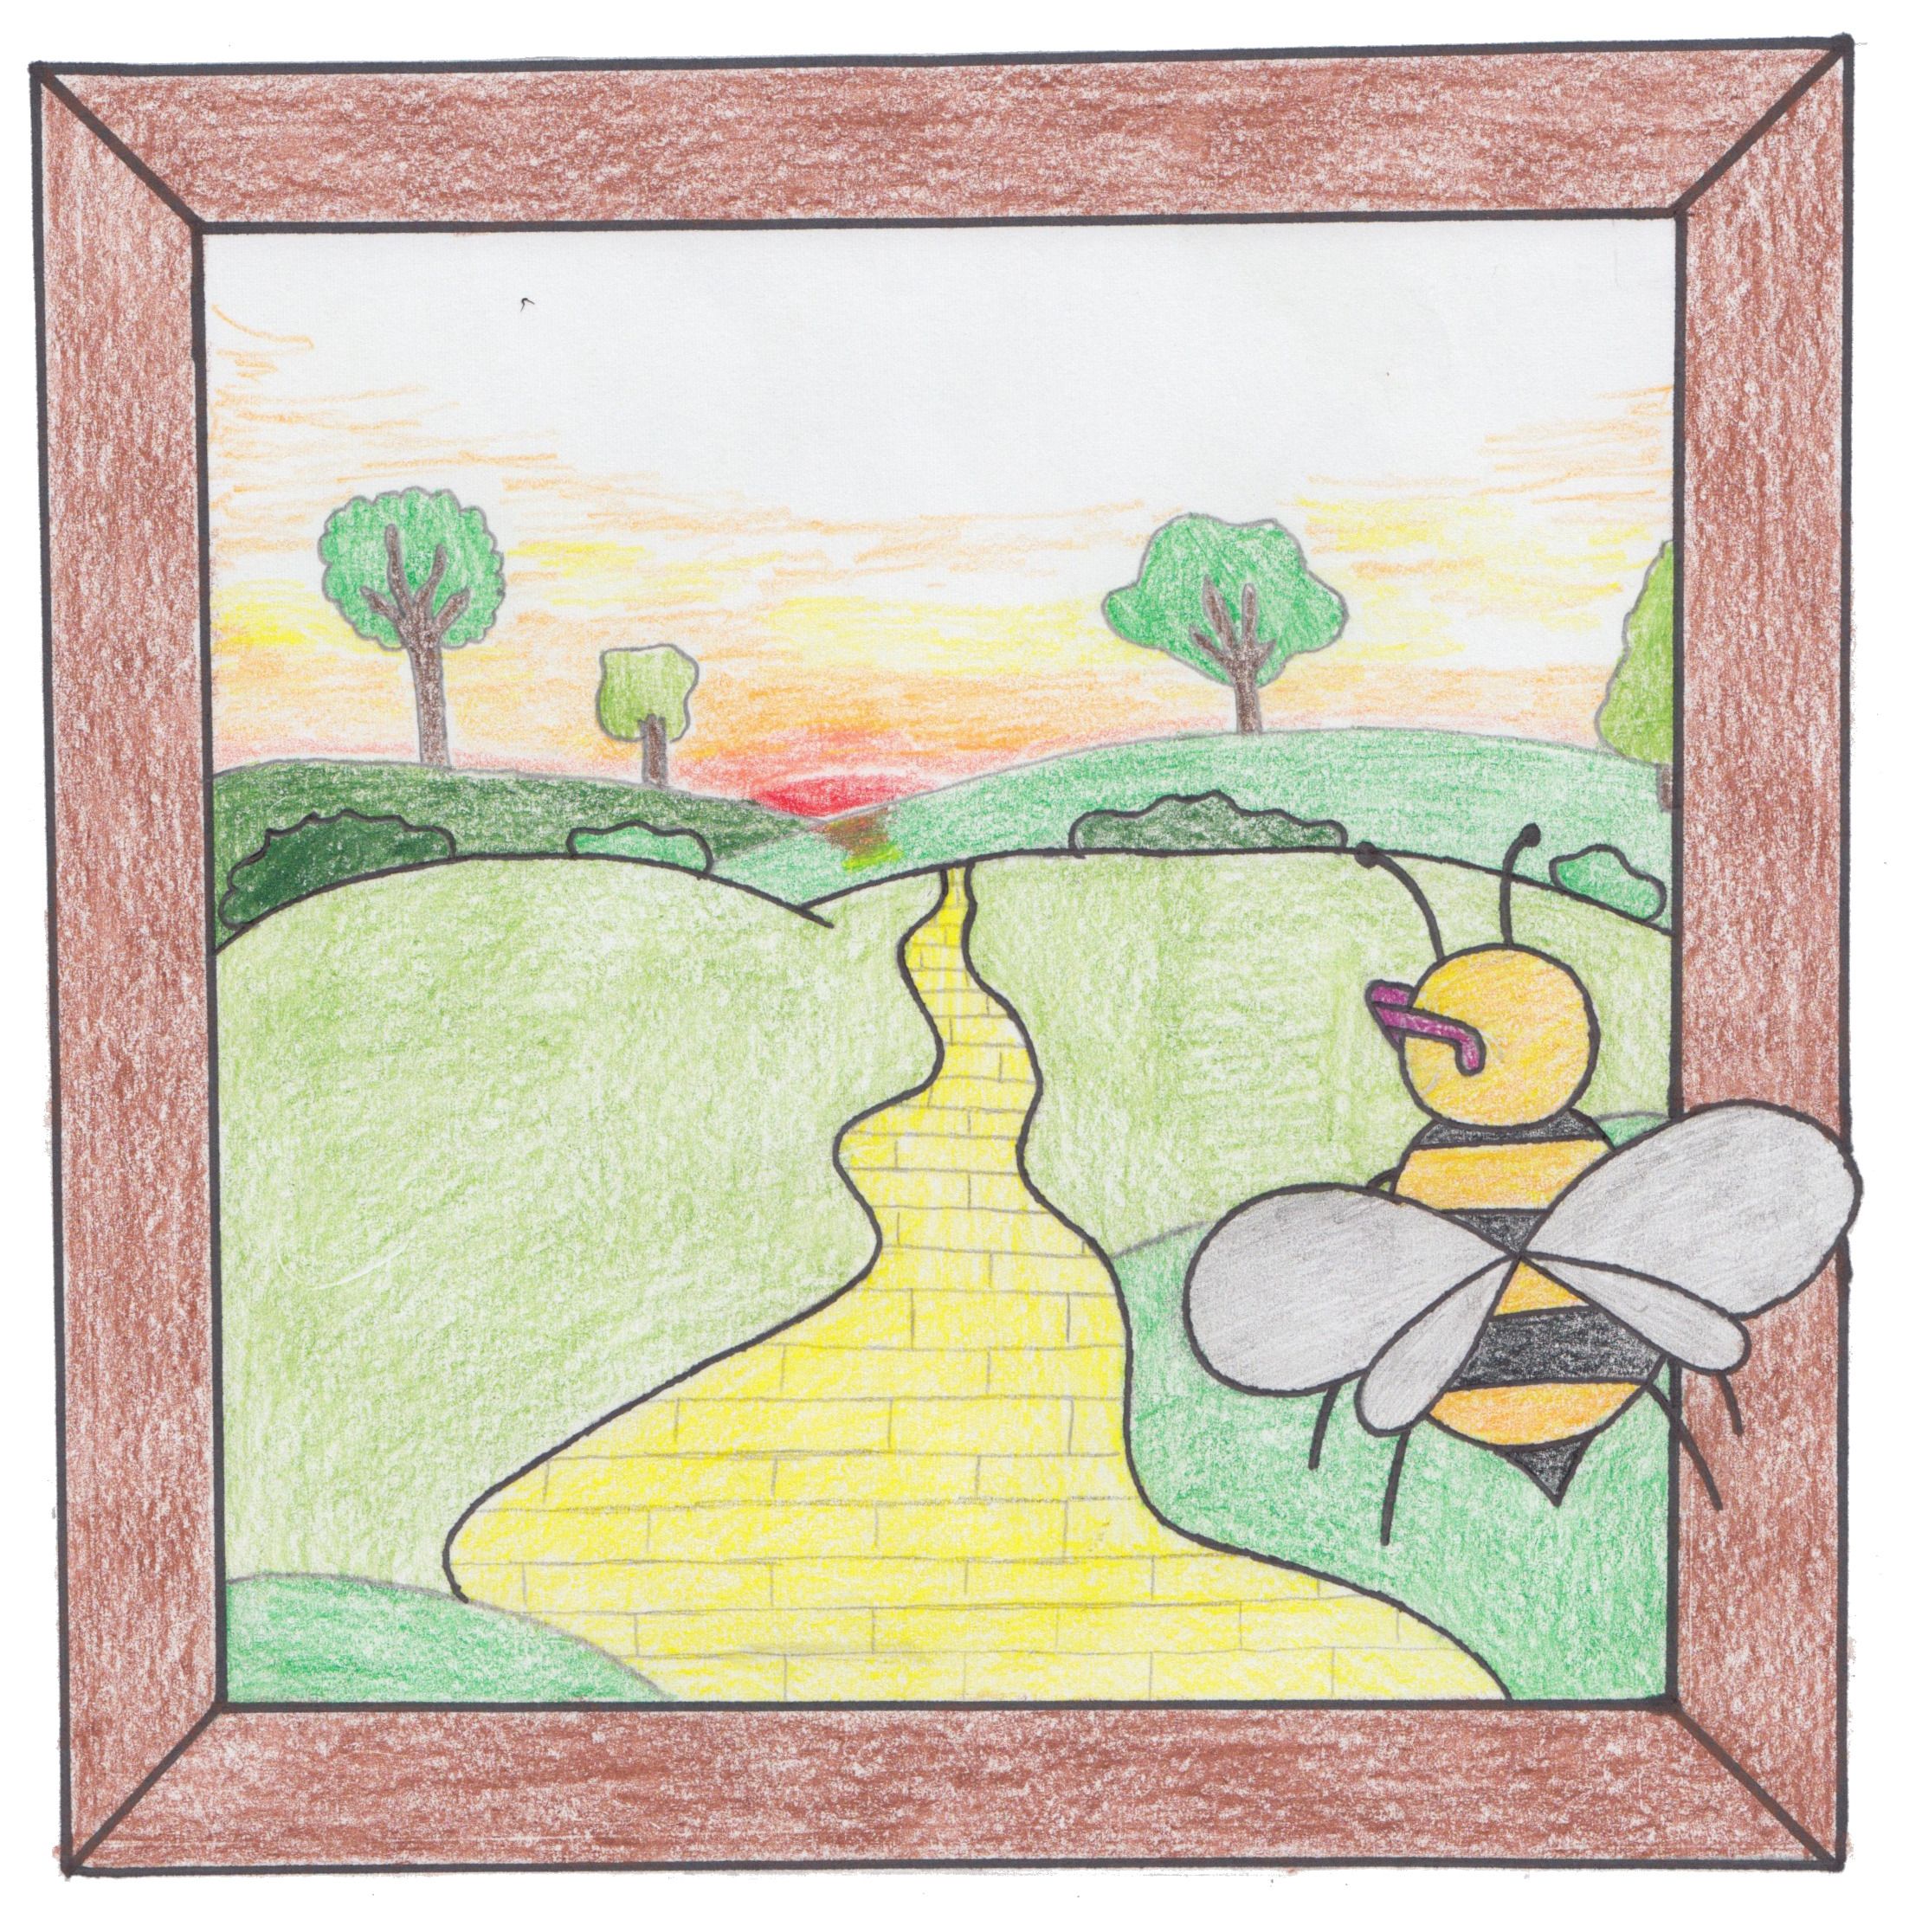 A bee dressed as Elton John looking out at a yellow brick road